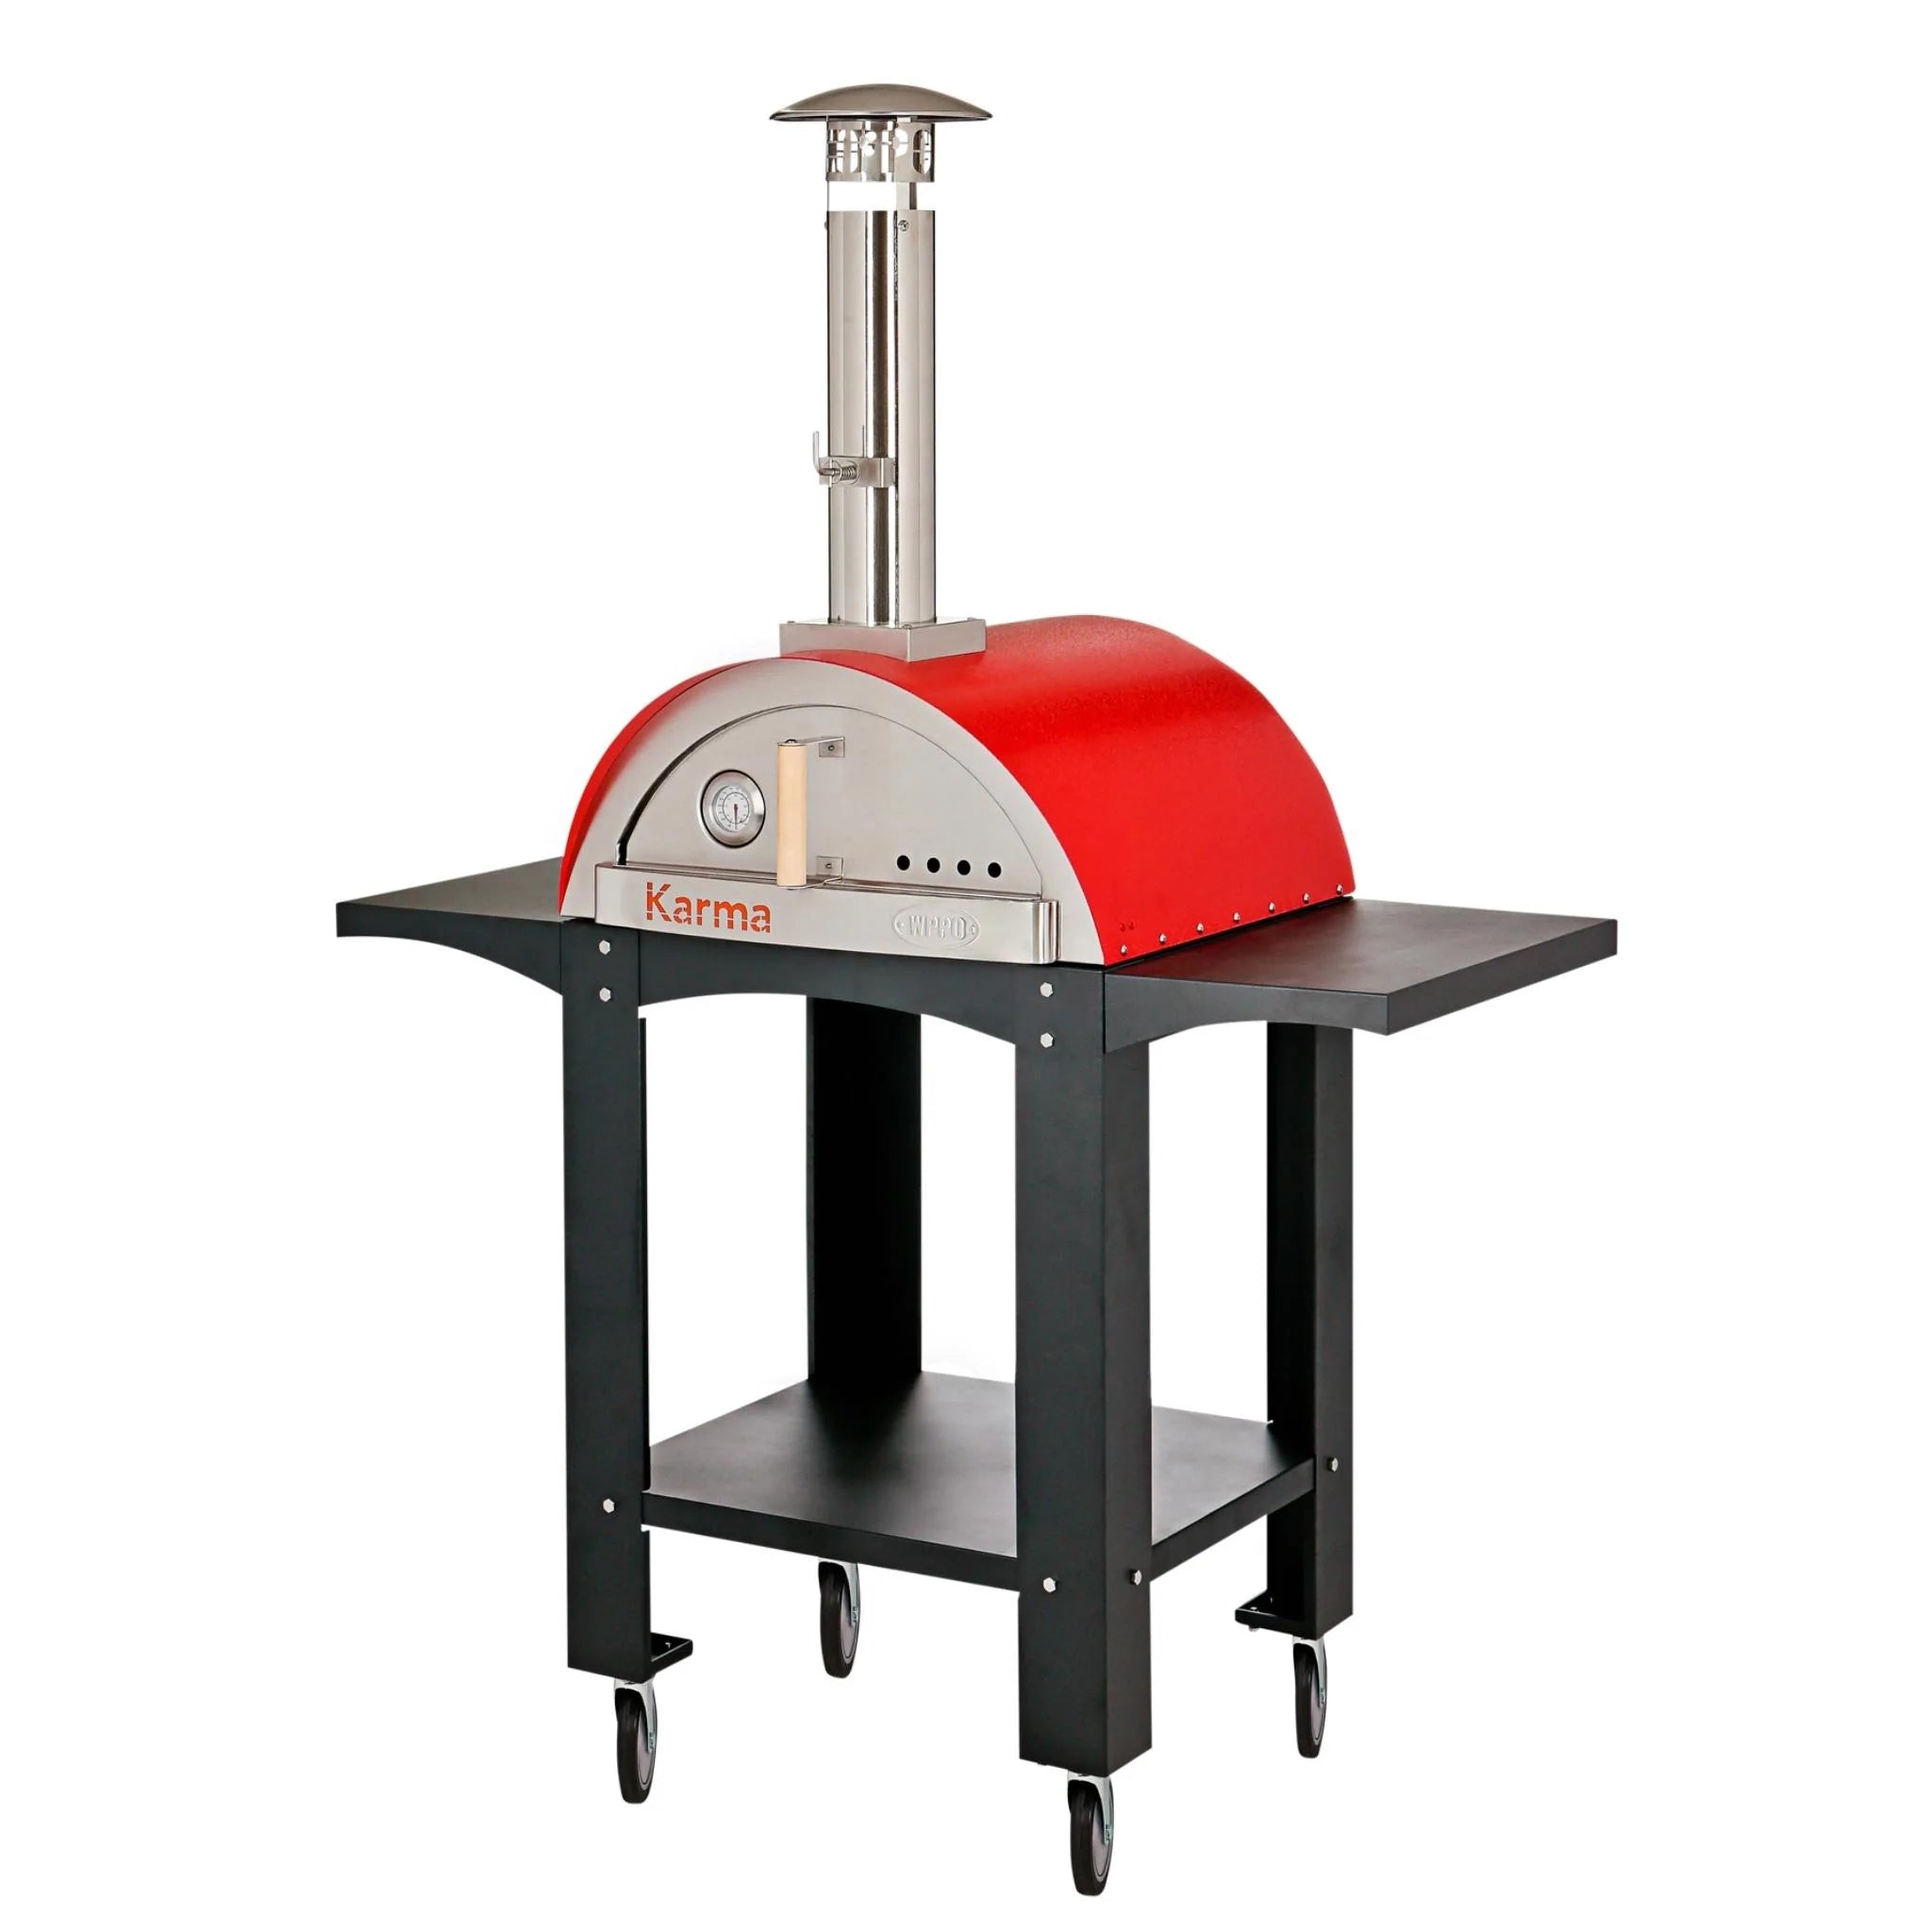 XL Size Wood Fired Outdoor Stainless Steel Pizza Oven BBQ Grill w/ Acc –  SDI Factory Direct Wholesale